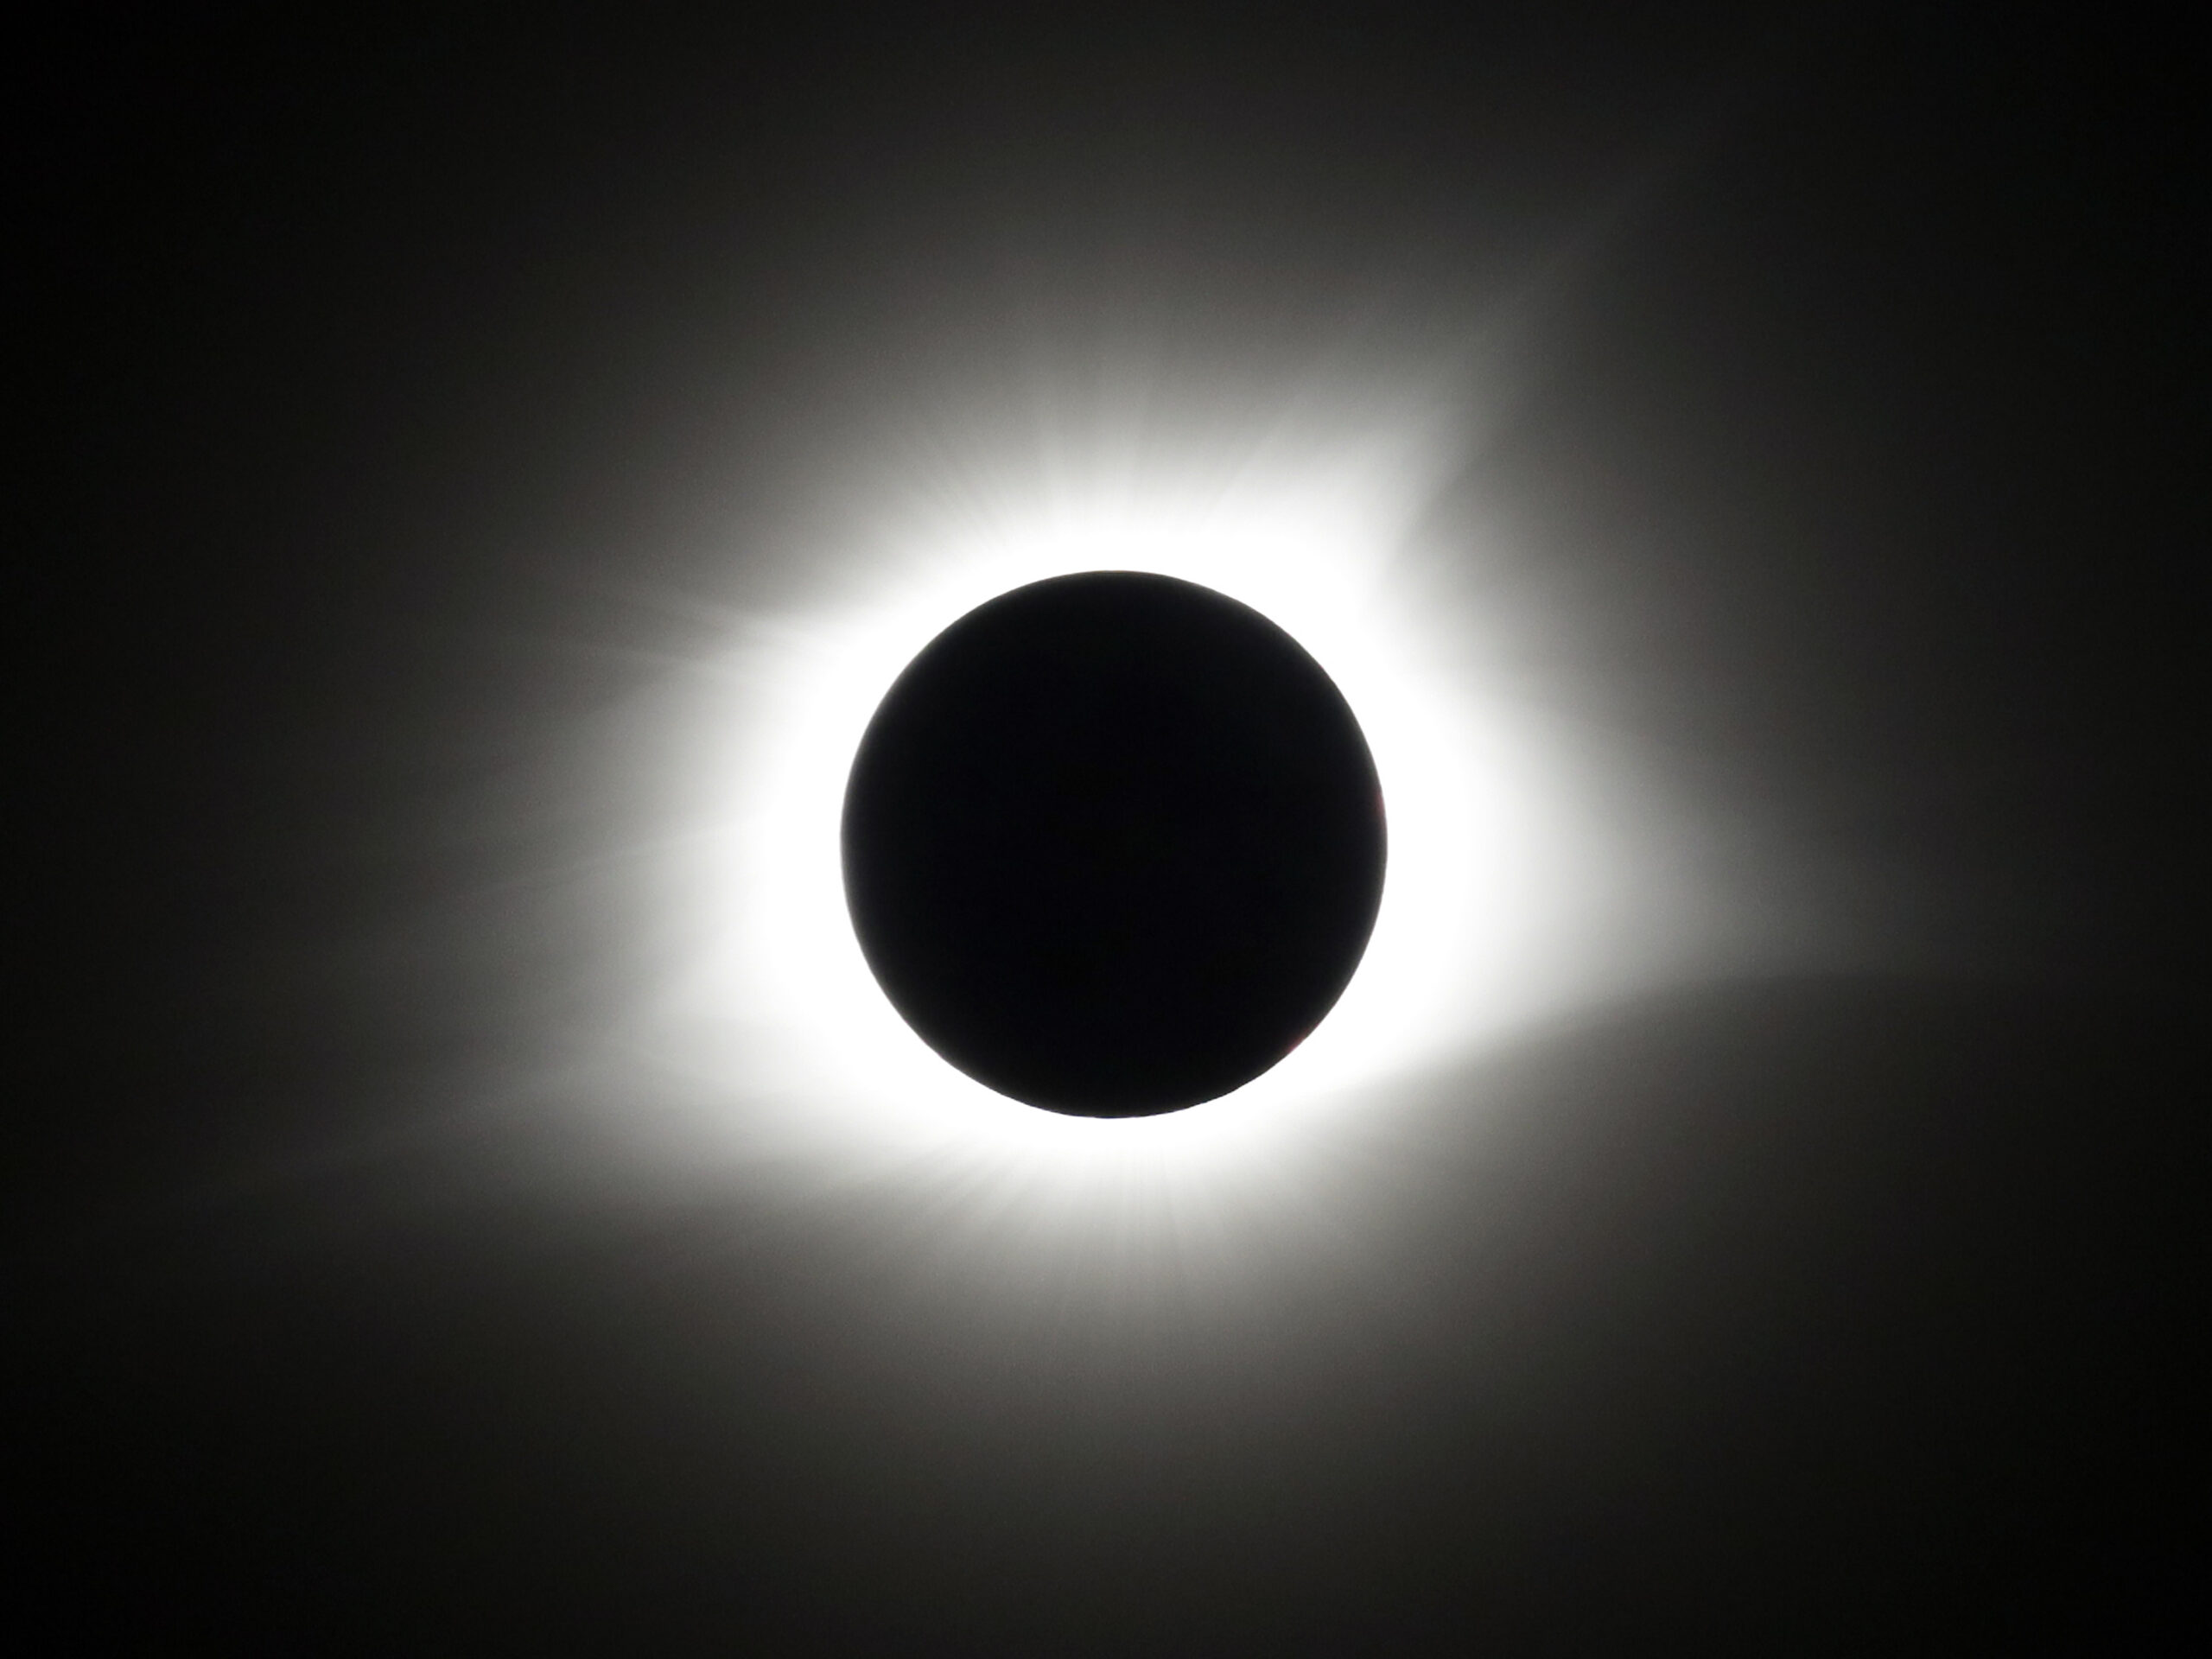 Clouds and rain? Here’s how to still enjoy the total solar eclipse